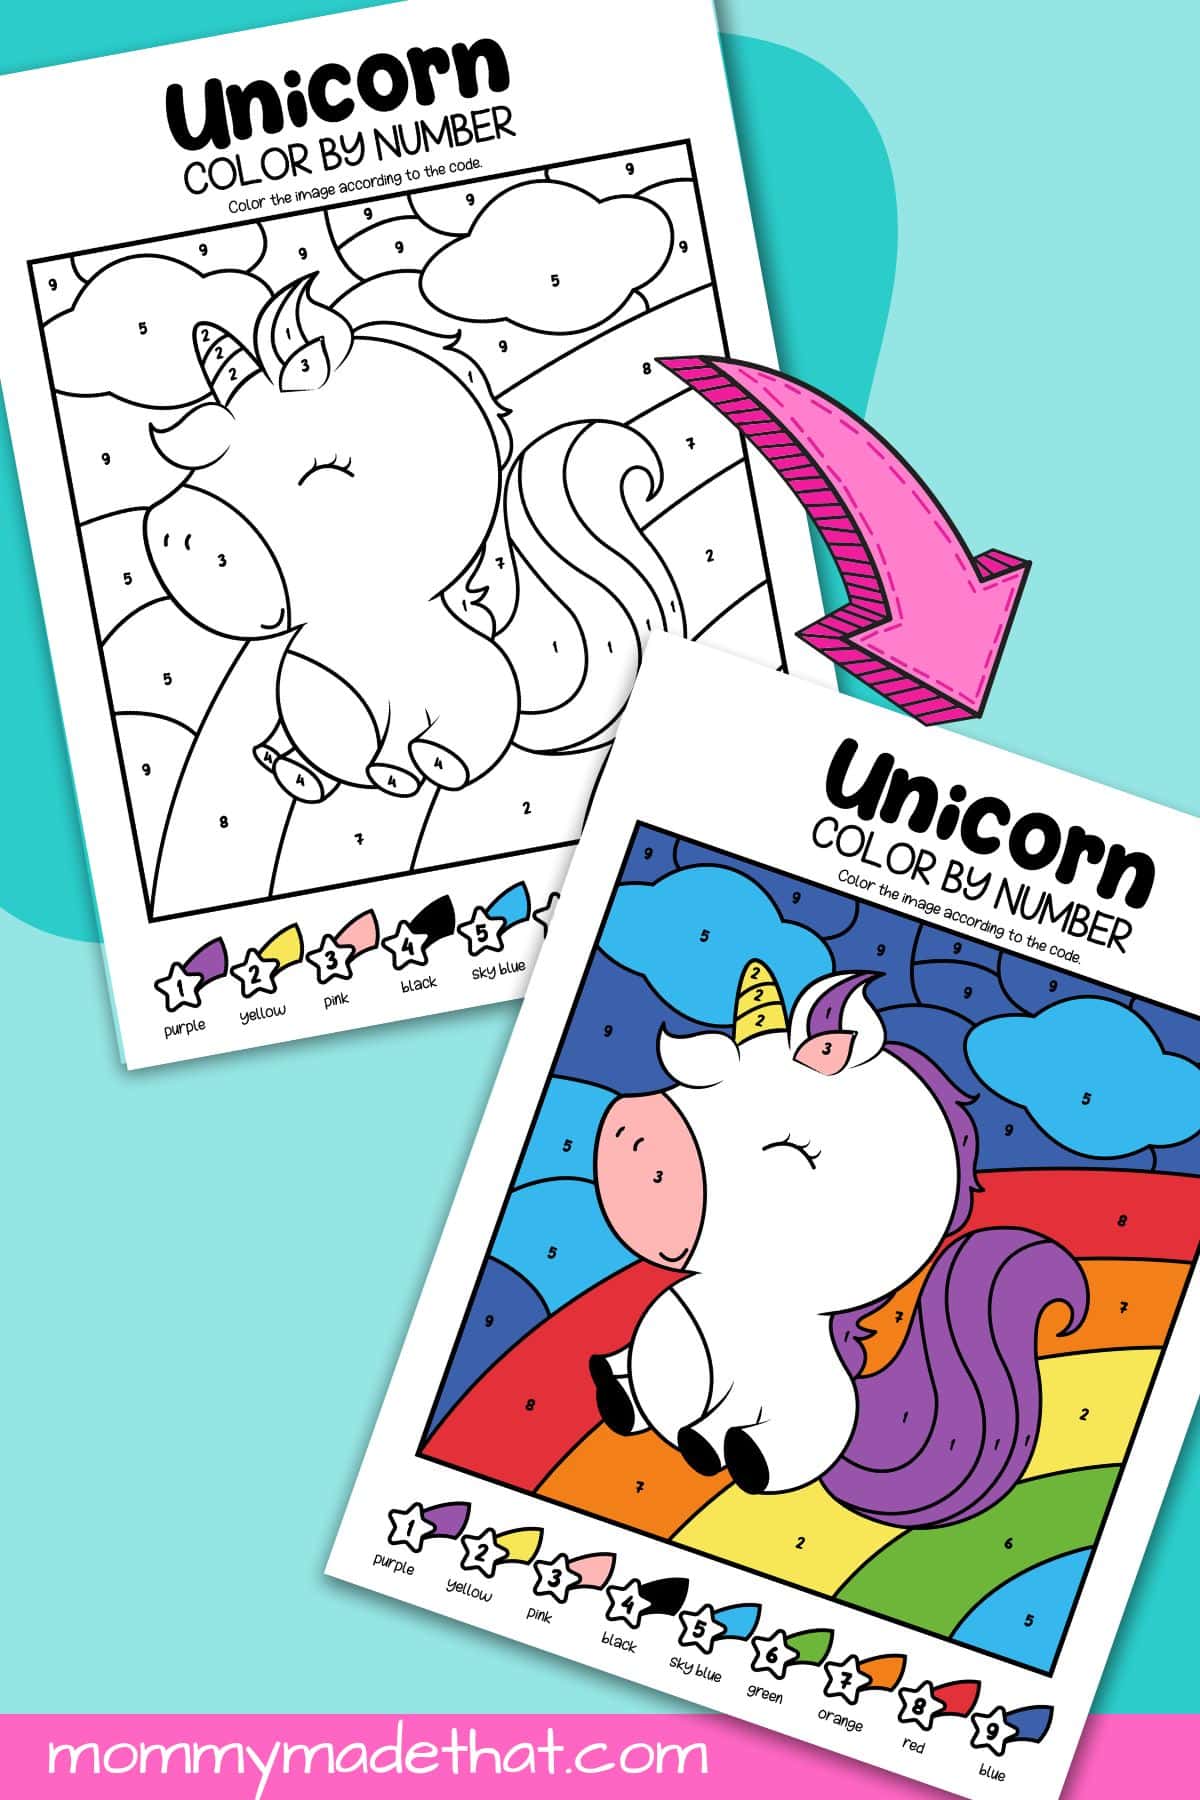 unicorn color by numbers